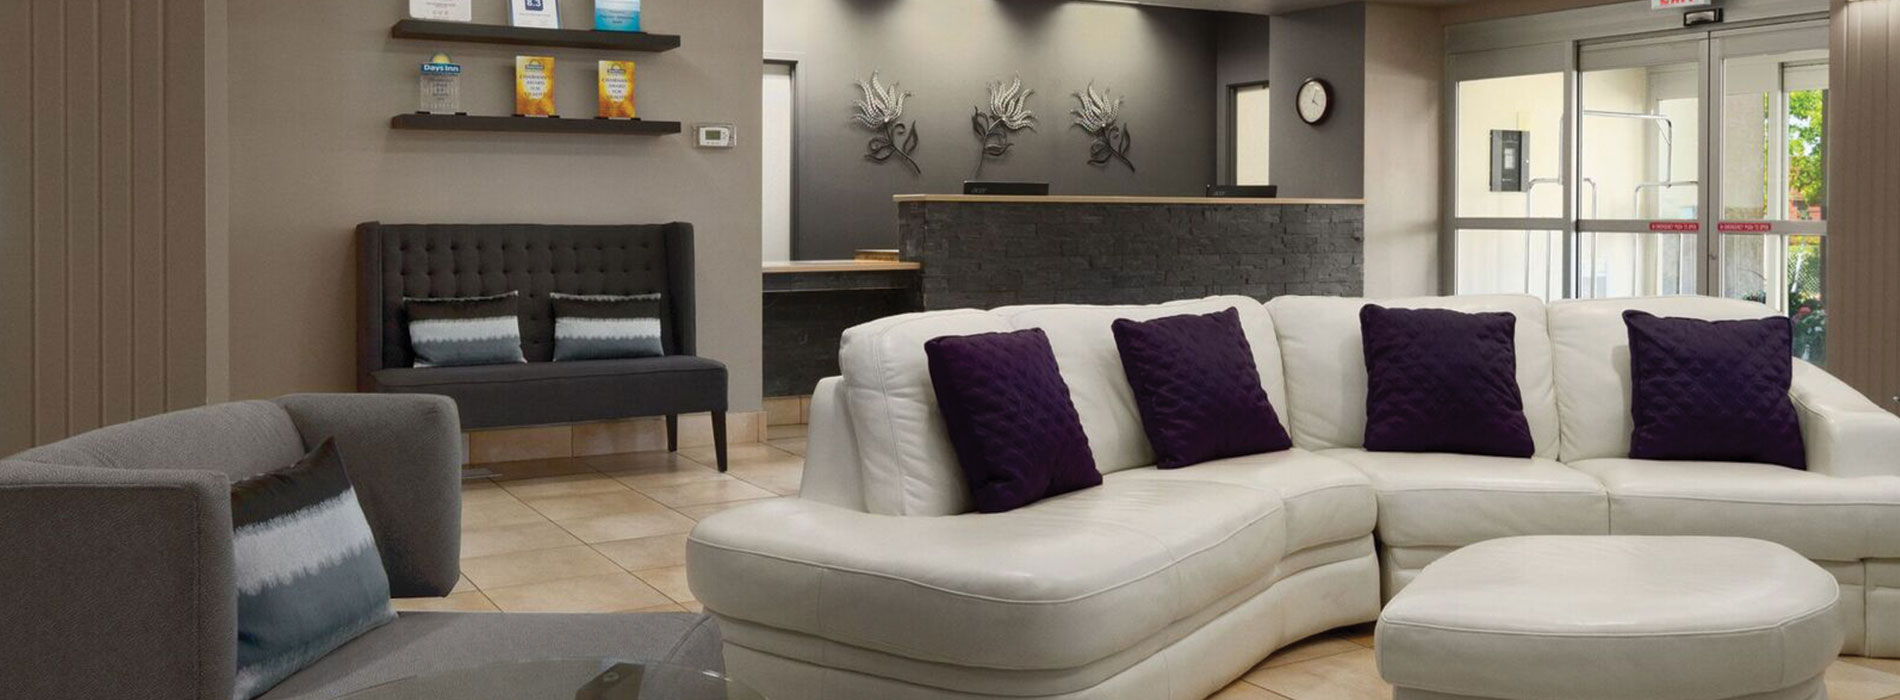 The lobby in d3h Days Inn Edmonton South is a welcoming space with comfortable seating:  a plush white sectional sofa with matching ottoman, a gray single seat armchair and charcoal gray loveseat placed next to the stone check-in counter.  Three silver and black metallic tulip wall ornaments are mounted against the cloudy concrete gray walls behind the check-in desk.